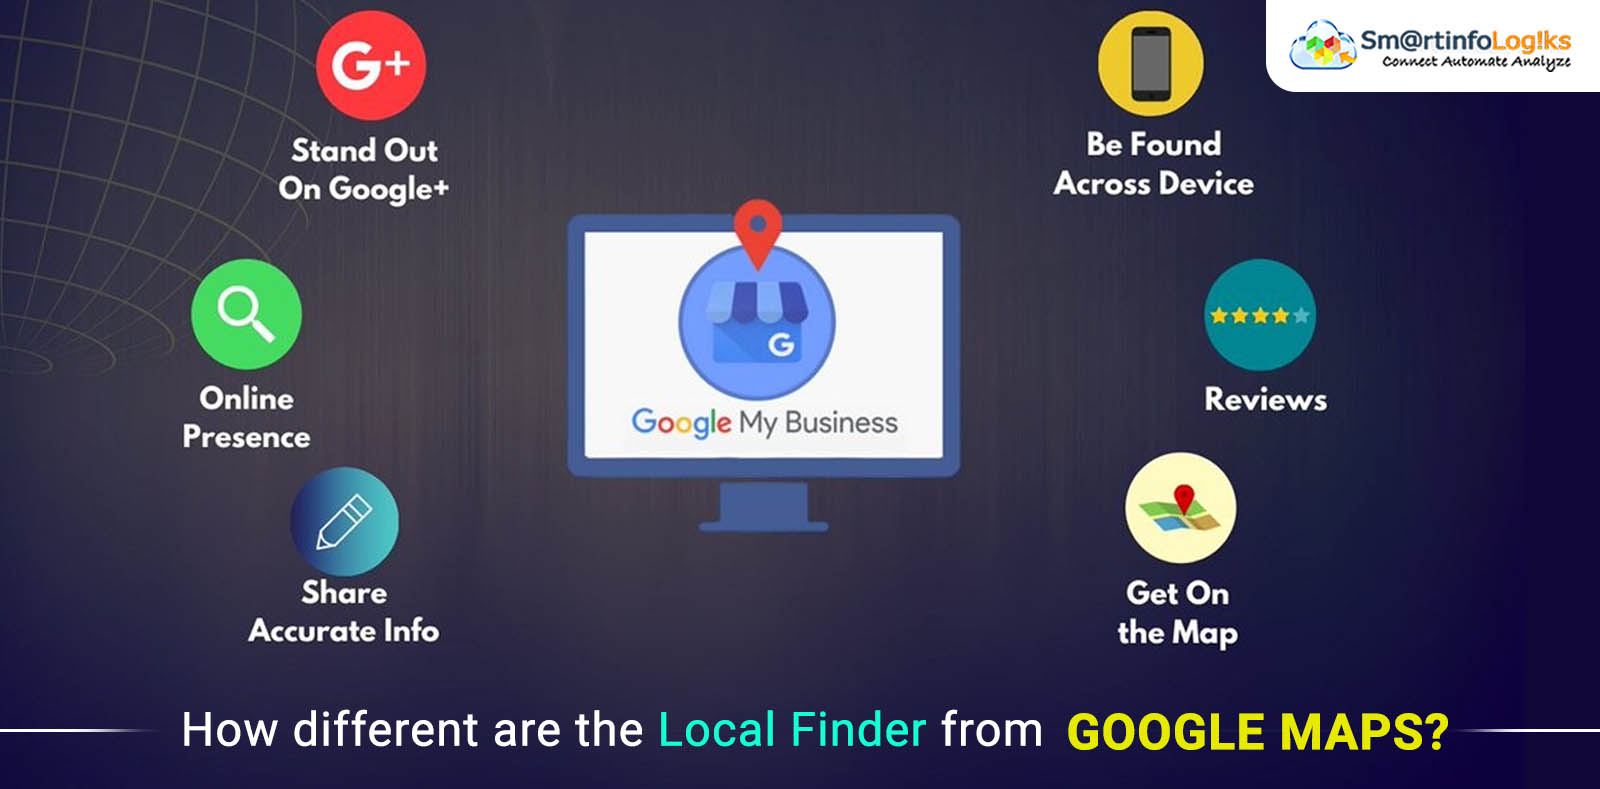 How different are the Local Finder from Google Maps?